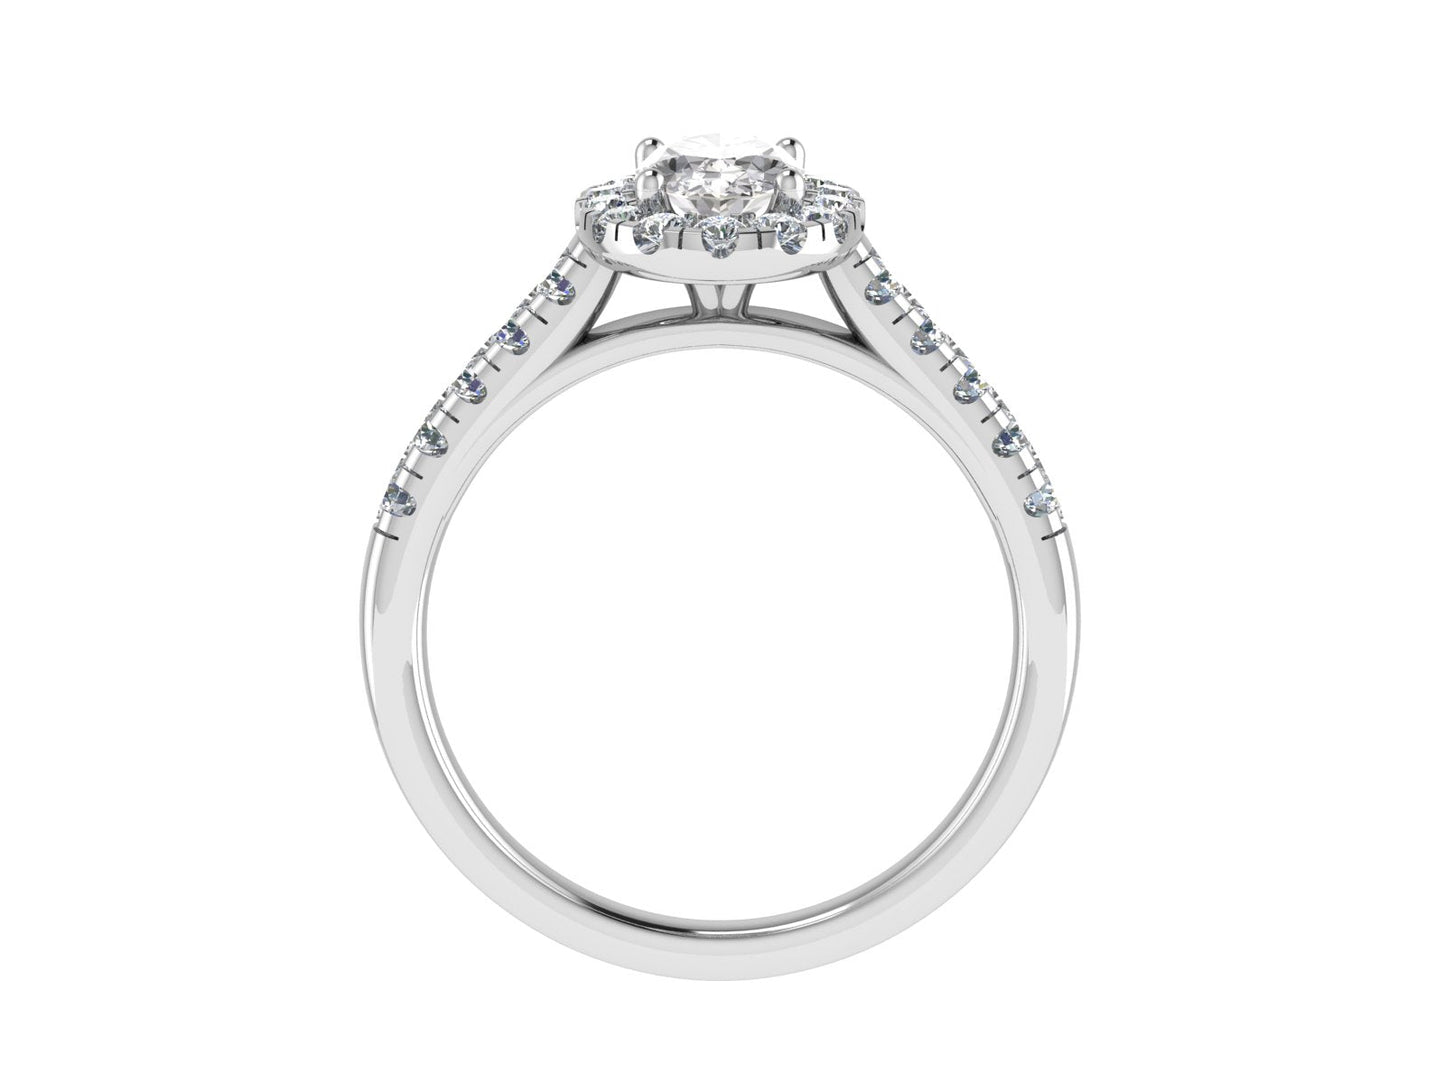 Oval Ring with Diamond Halo and Diamond set shoulders 5 x 3mm